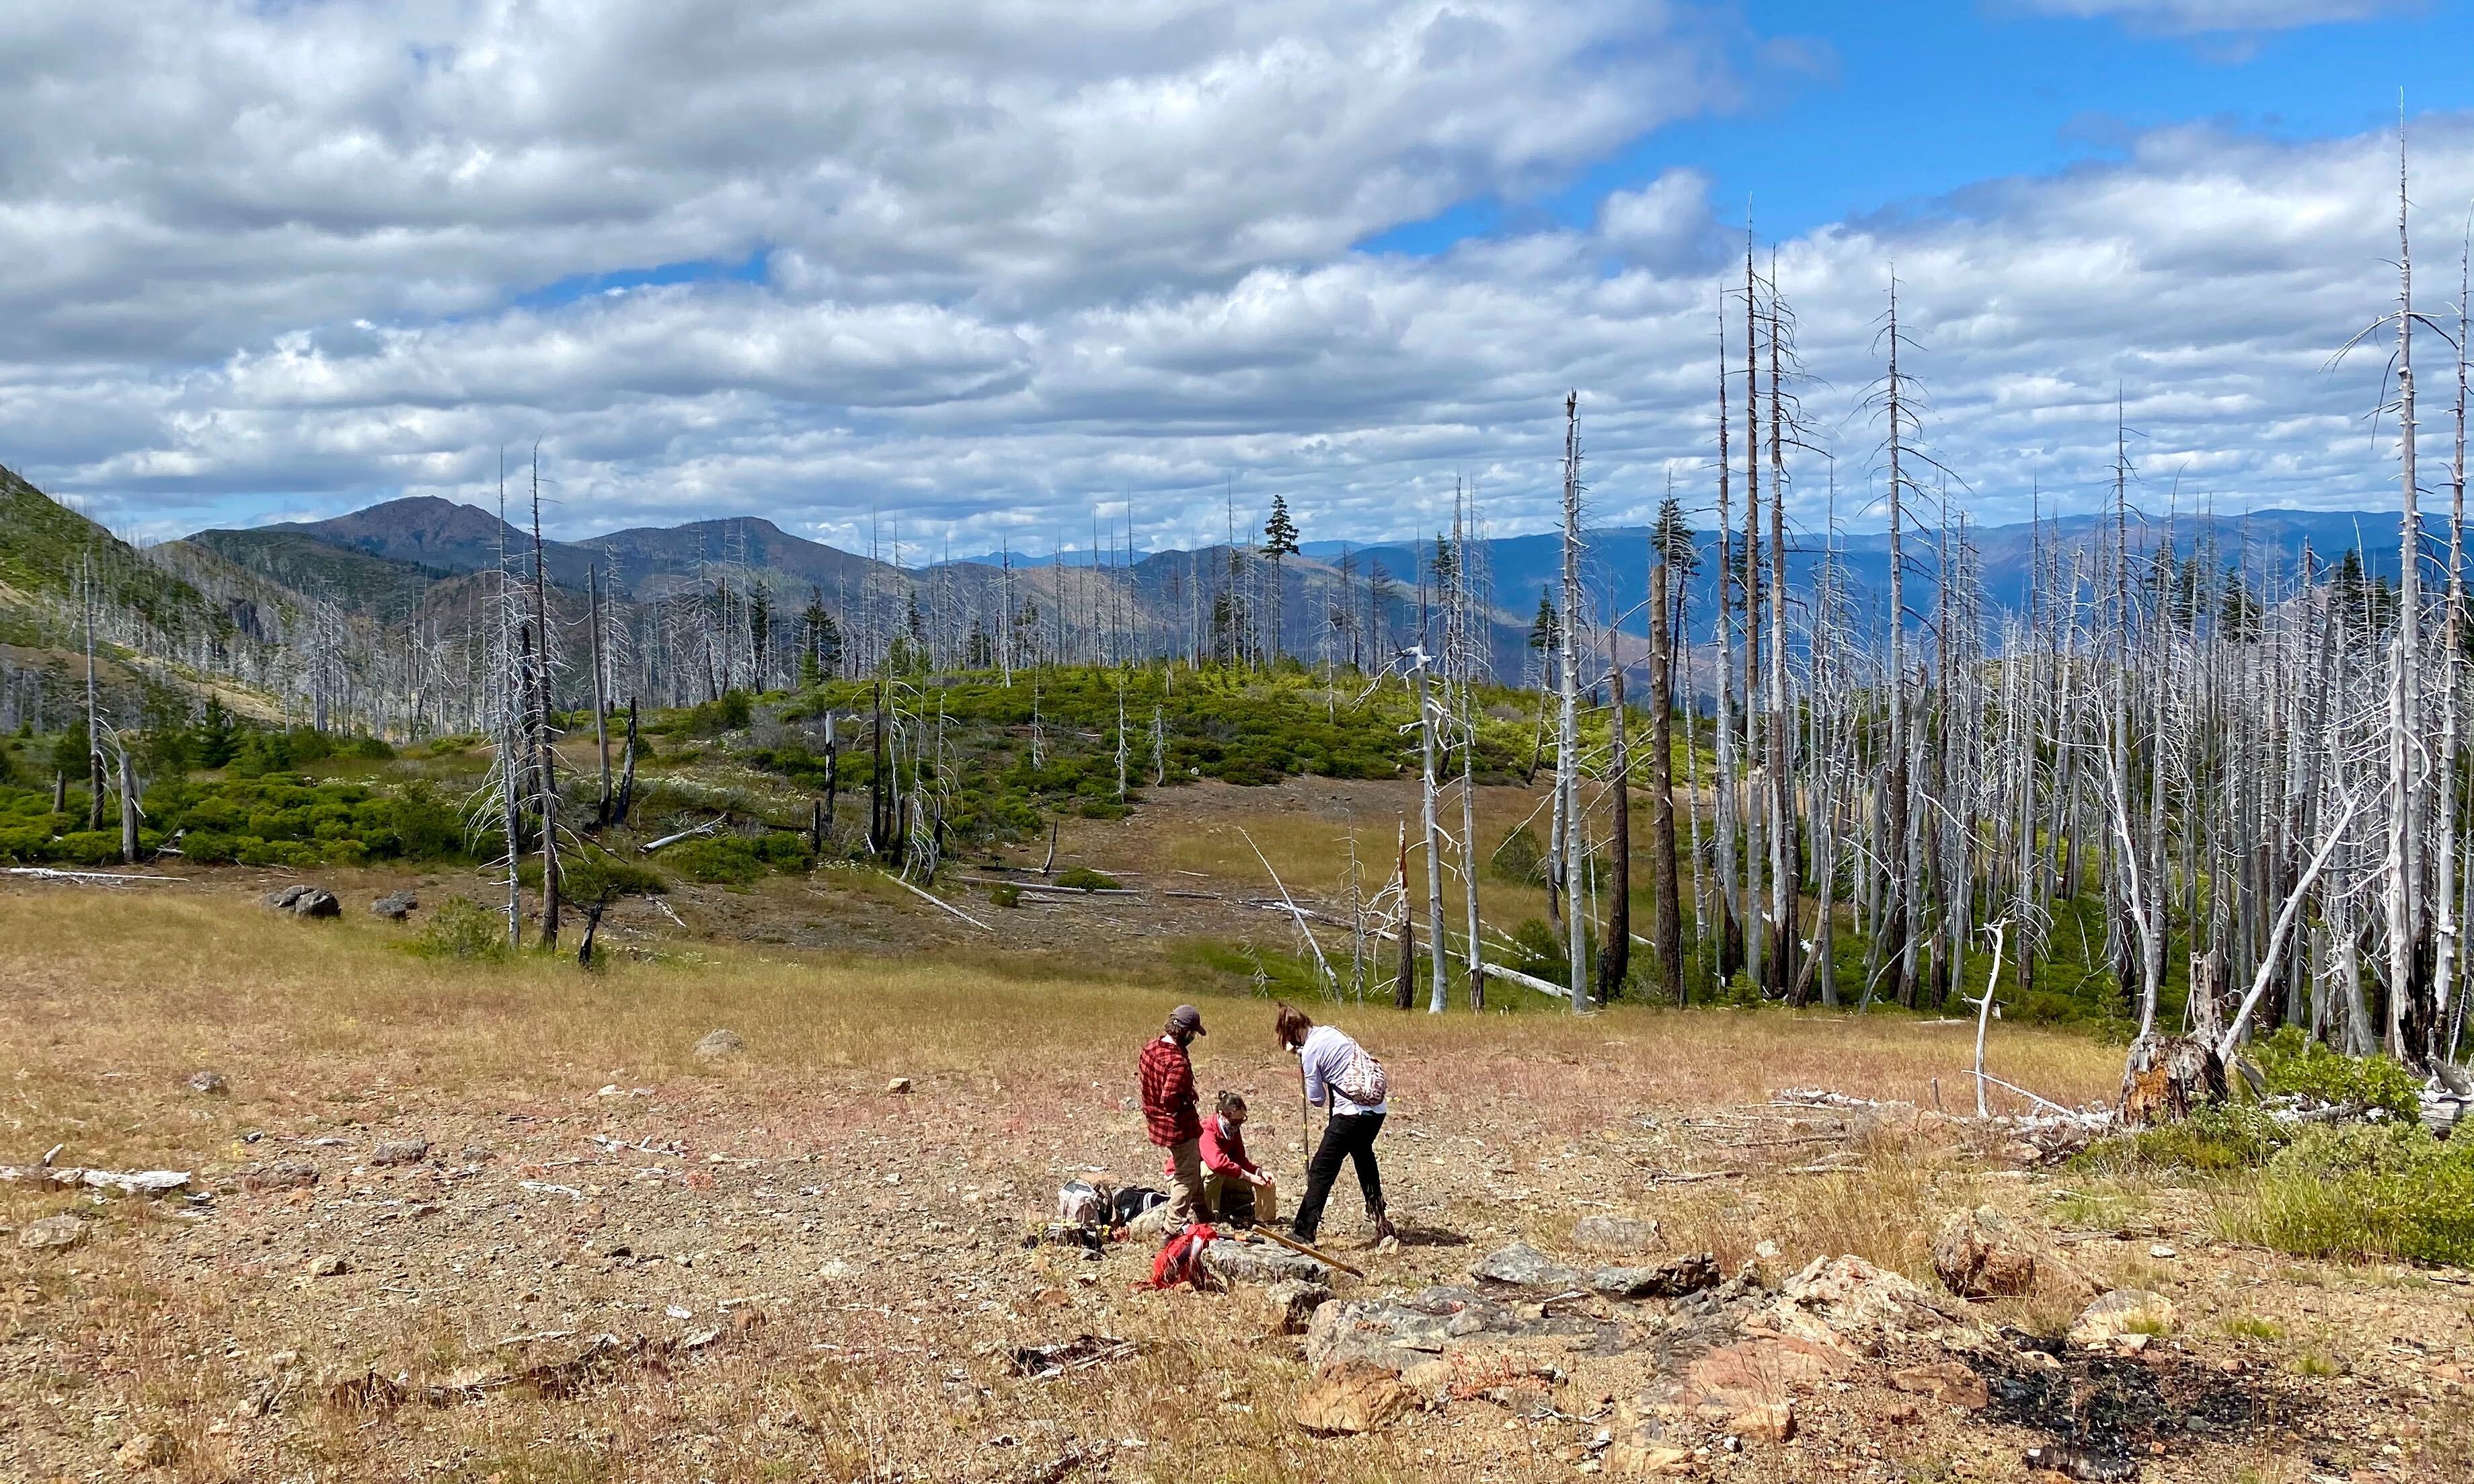 Three young women take a soil core in a grassland next to a burned out forest with small mountains in the background.